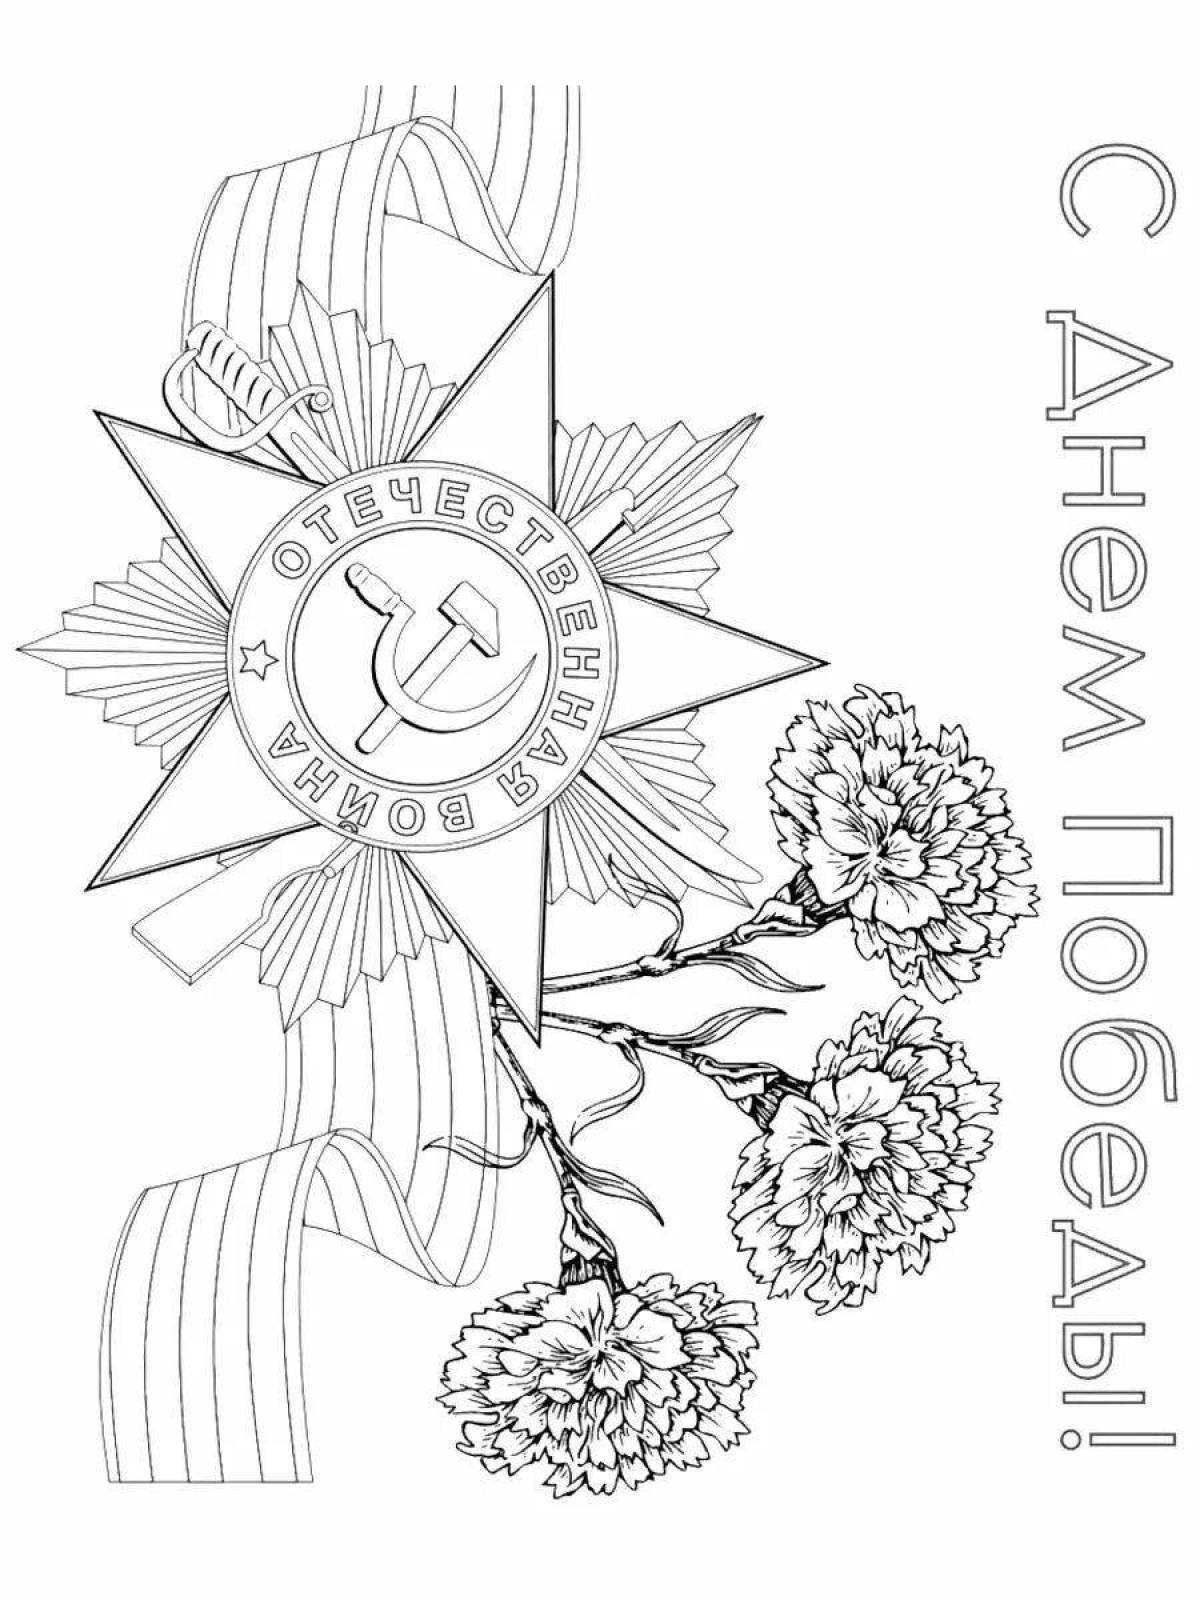 Great st george ribbon coloring template for kids